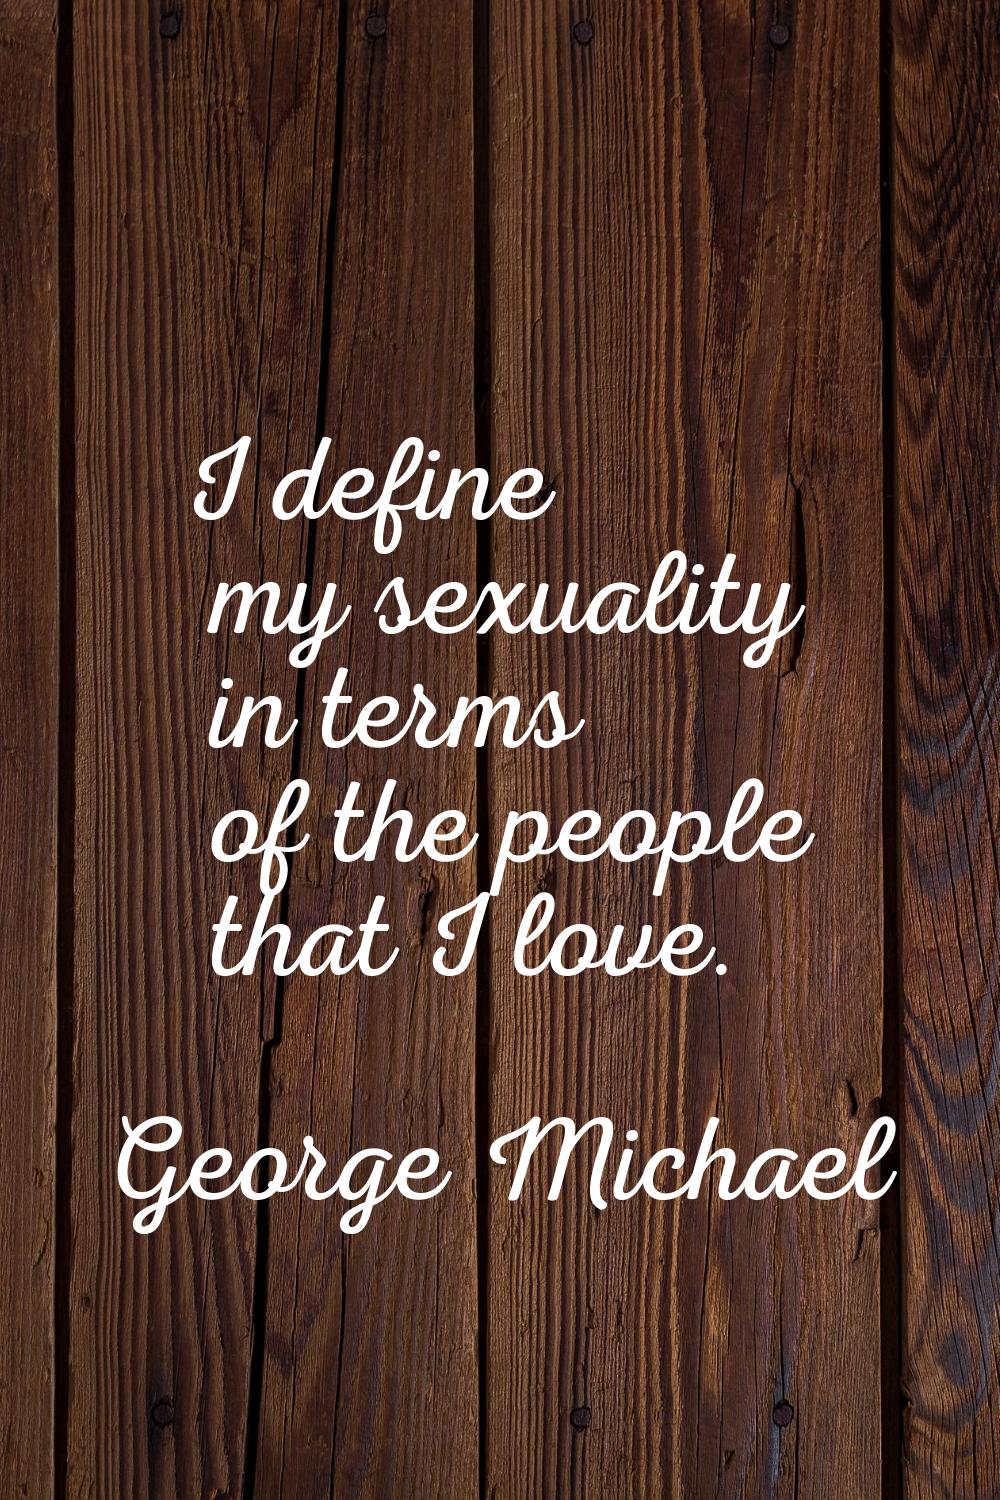 I define my sexuality in terms of the people that I love.